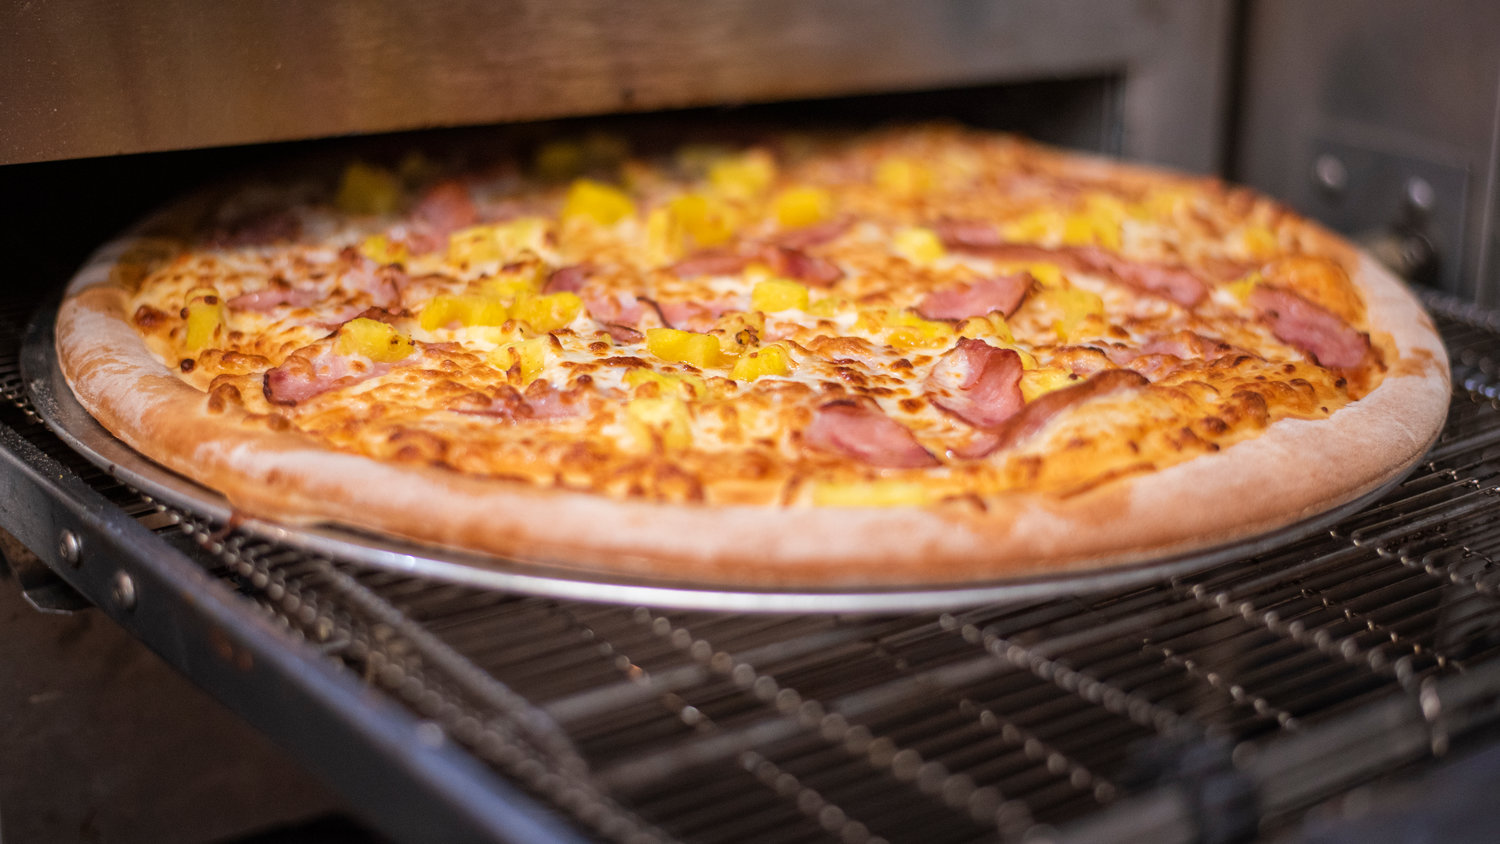 A Hawaiian Pizza is cooked on an oven at Pizza Mia in Tenino.